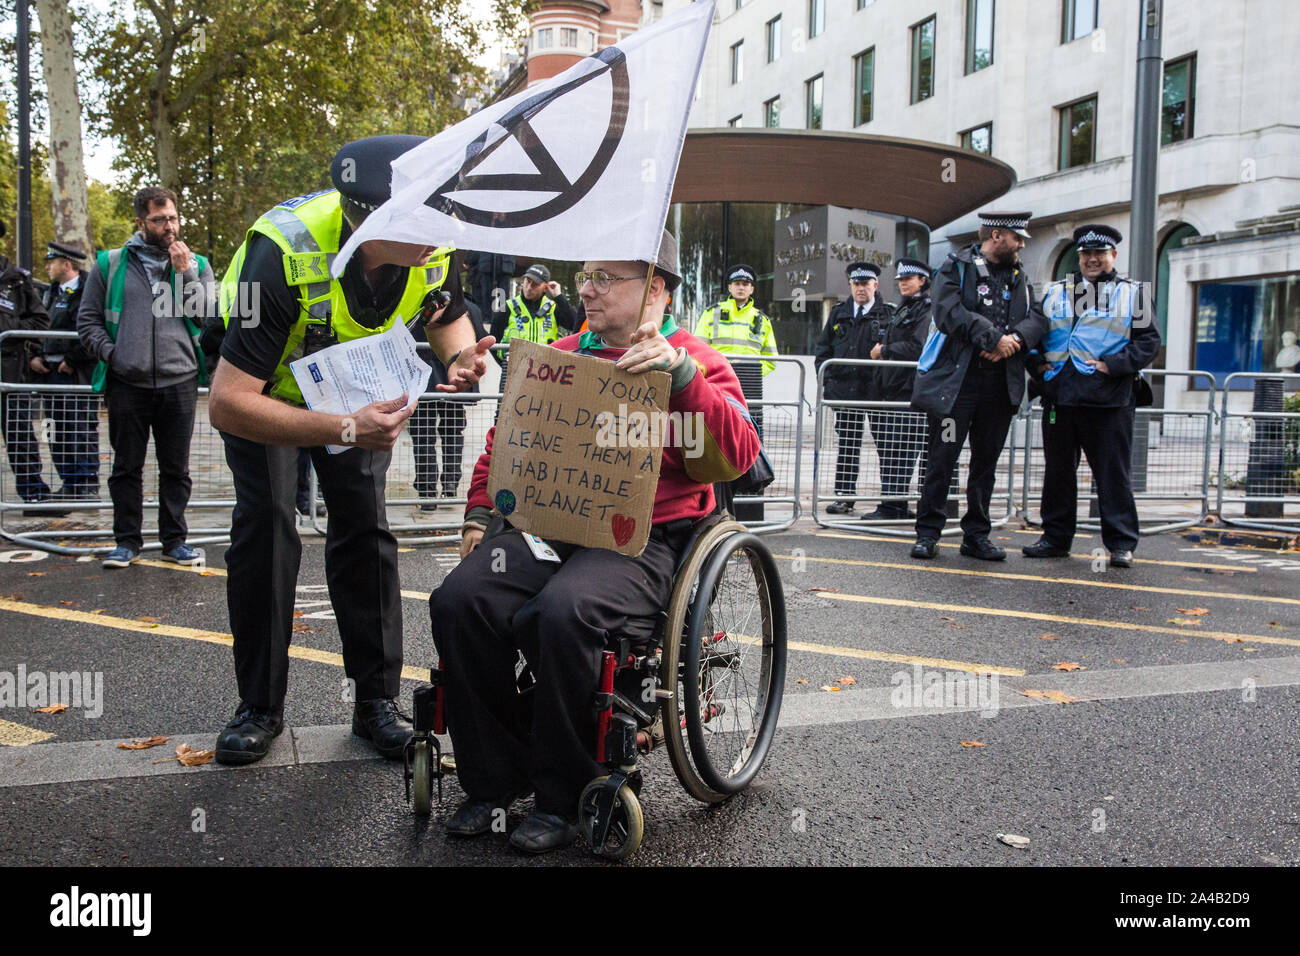 London, UK. 13 October, 2019. A police officer serves a notice under Section 14 of the Public Order Act 1986 to a disabled climate activist from Extinction Rebellion during a protest outside New Scotland Yard against tactics employed by police officers which impinge on the right to protest of disabled activists, including the confiscation of wheelchair ramps, accessible toilets and tents. Credit: Mark Kerrison/Alamy Live News Stock Photo